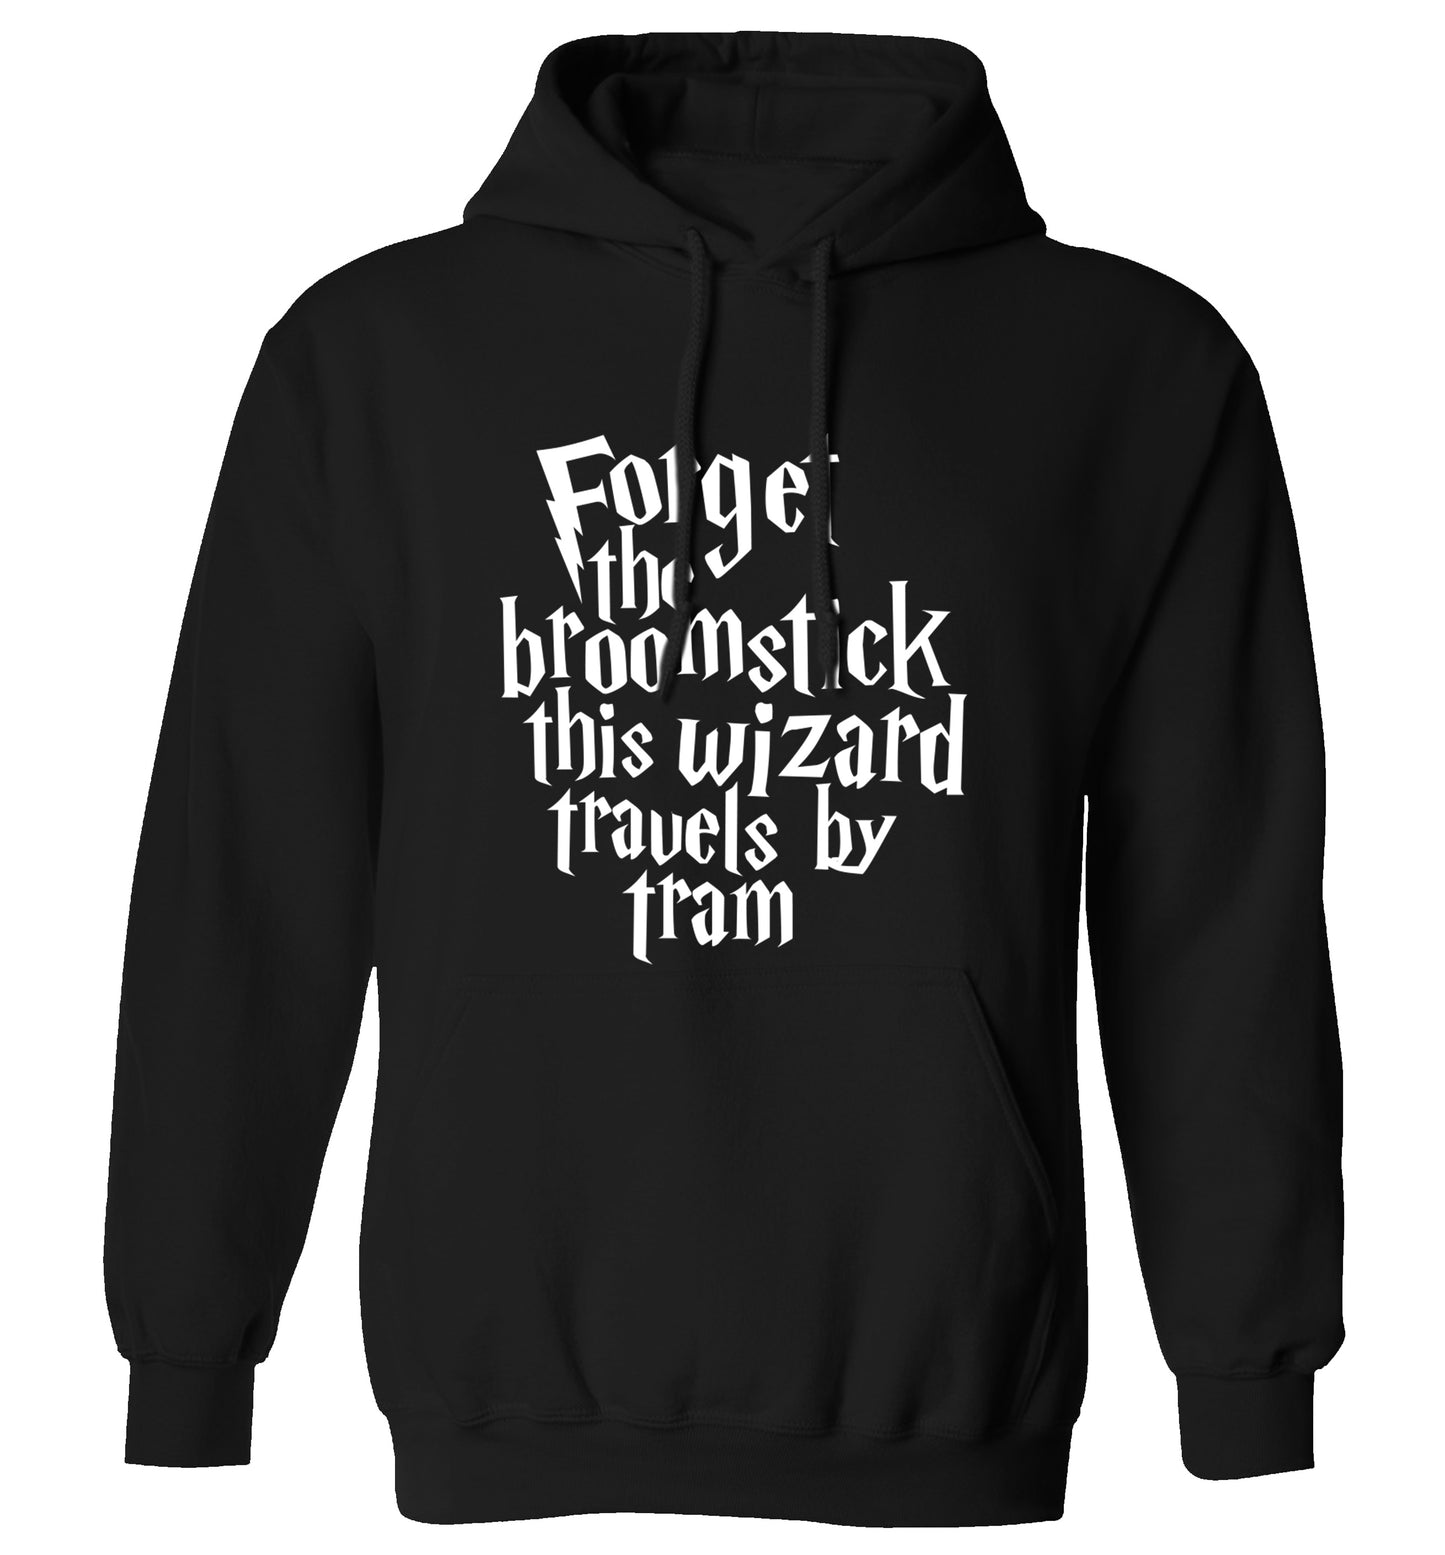 Forget the broomstick this wizard travels by tram adults unisexblack hoodie 2XL